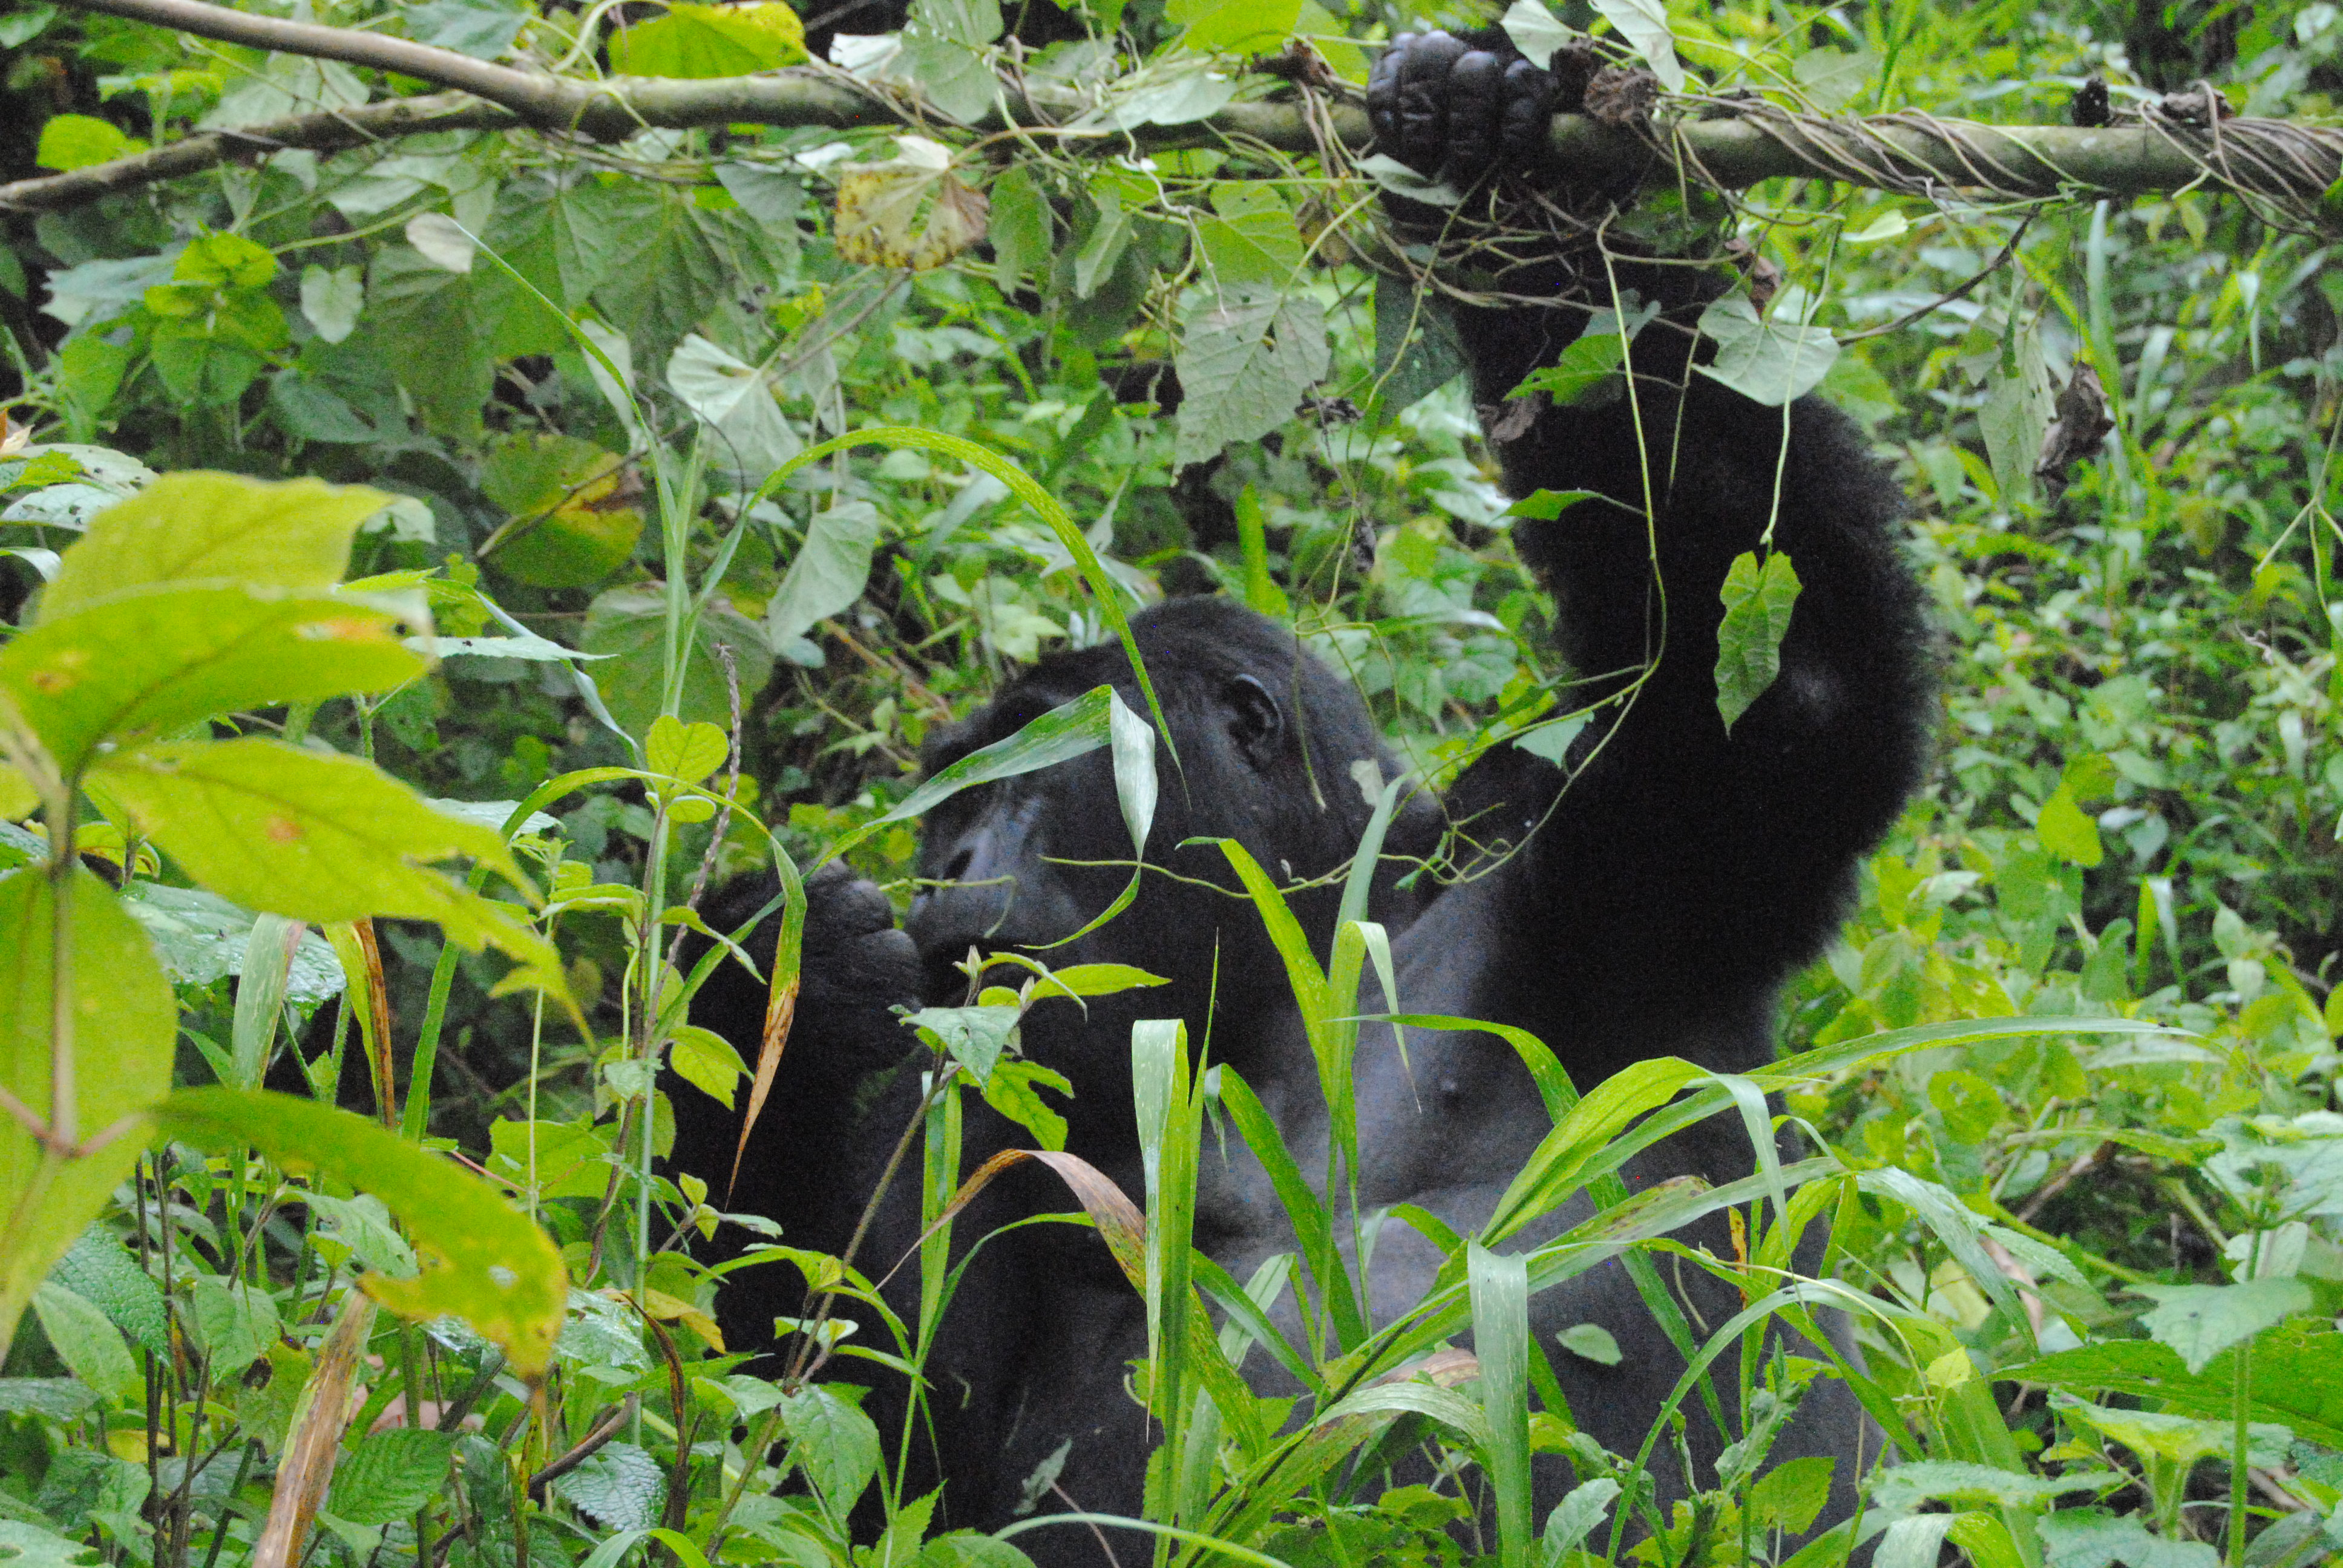 From conflict to coexistence: Living sustainably with Uganda's mountain gorillas